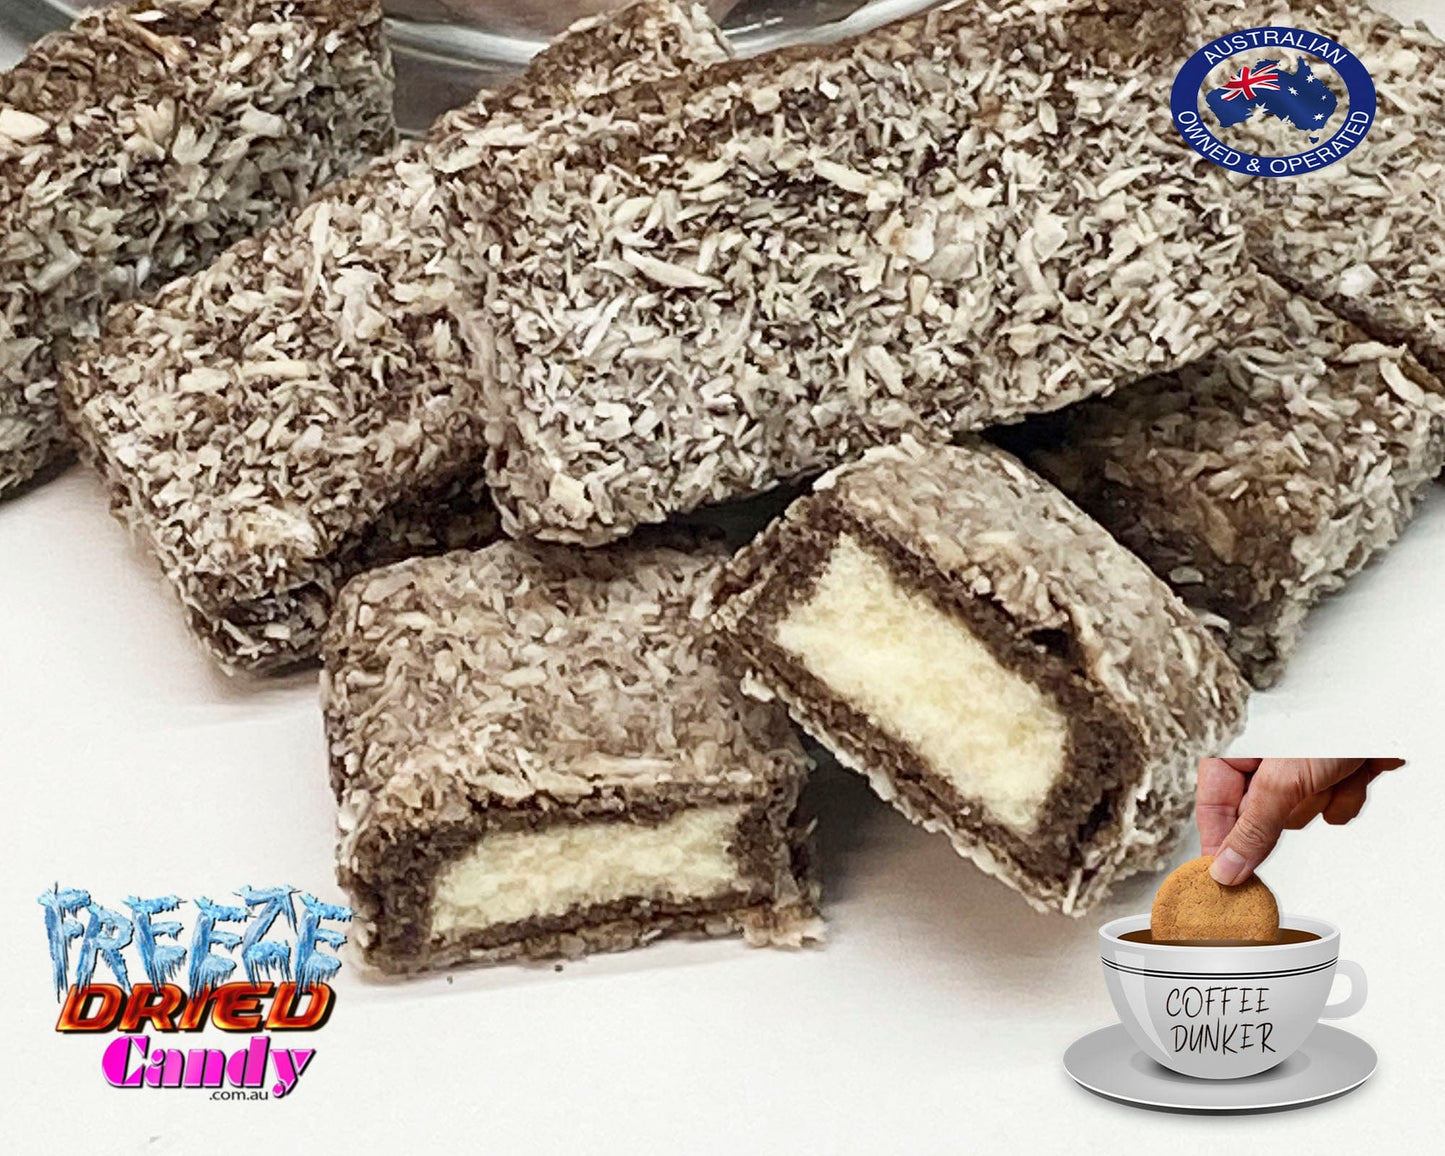 COFFEE DUNKERS..☕️ The crunch and density of a good piece of Freeze Dried Lamington dipped in a steaming cup of coffee is unmatched. While in its original form it would crumble under the mighty heat of coffee. Freeze Dried Lamingtons are extremely hard and and can withhold multiple dunks before it starts to crumble.  Making this treat a Coffee Dunkers dream. 